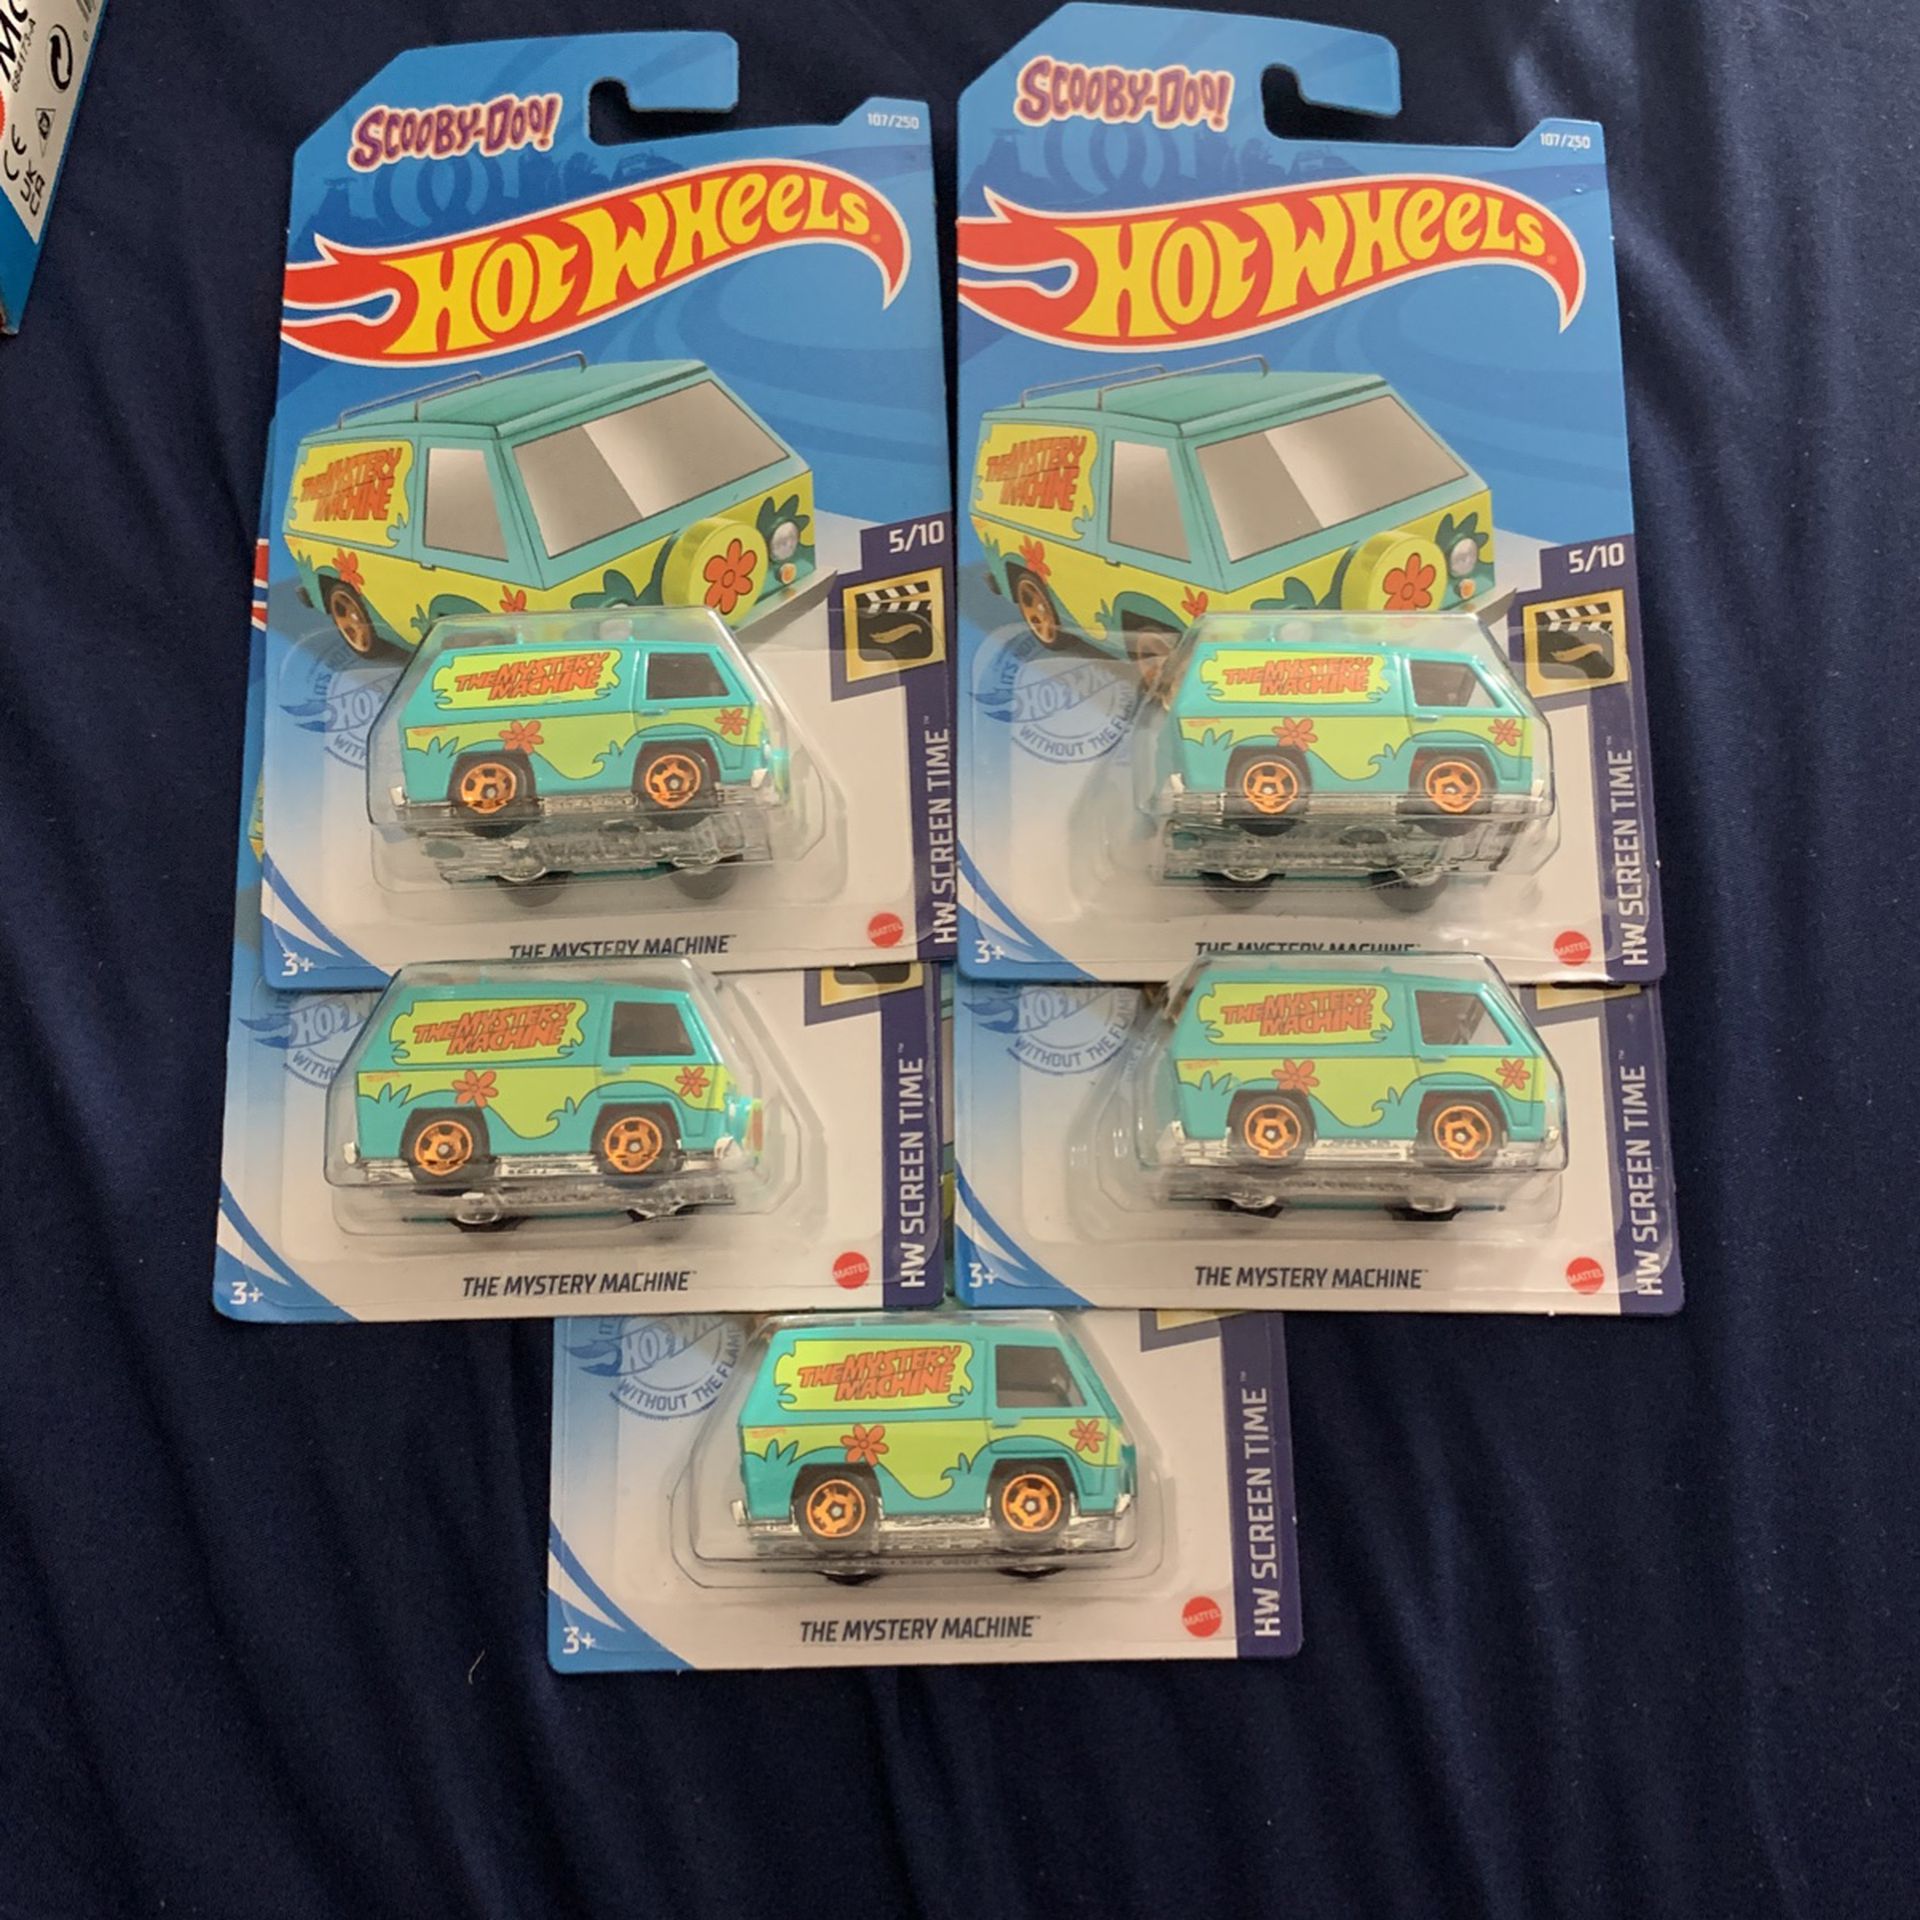 2021 Hot Wheels - Screen Time 5/10 - Scooby Doo! The Mystery Machine 